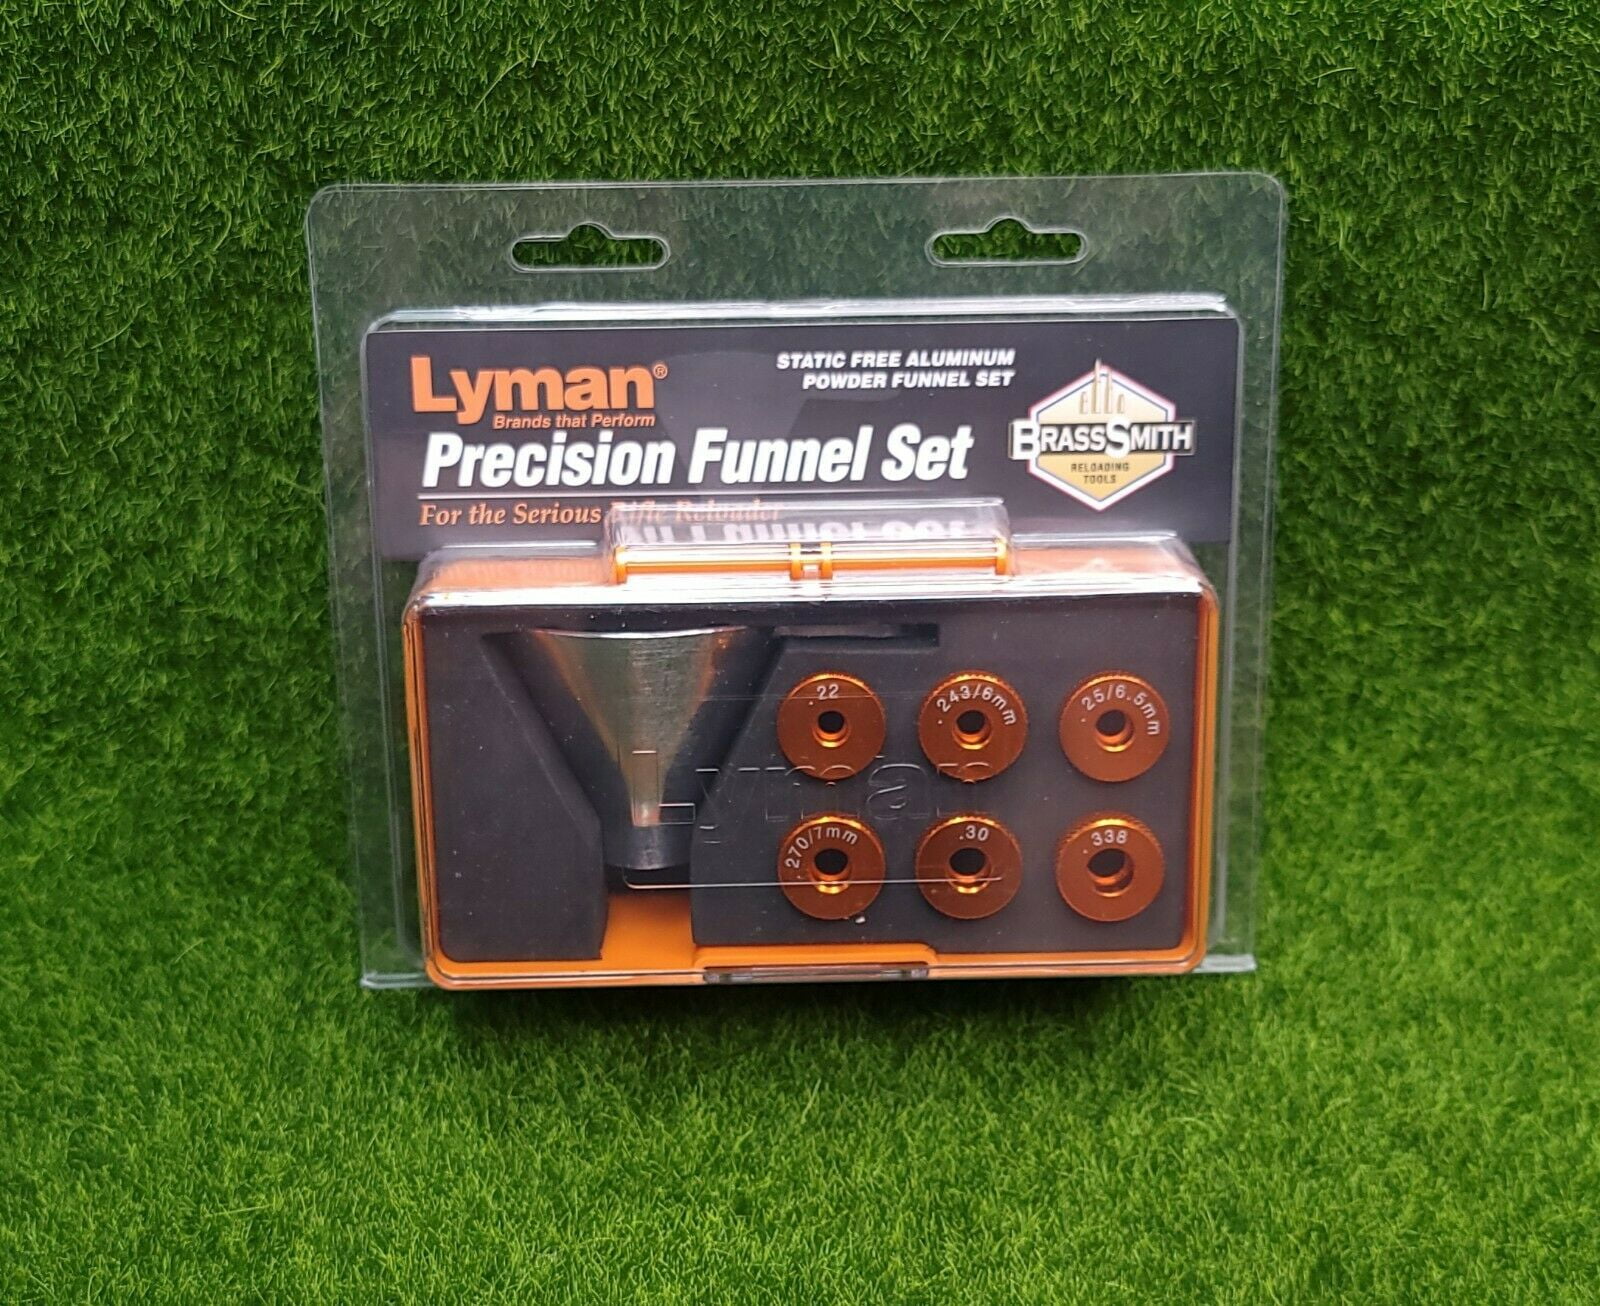 Lyman Brass Smith Pro Aluminum Powder Funnel Kit for .22 to .338 Cal # 7752432 